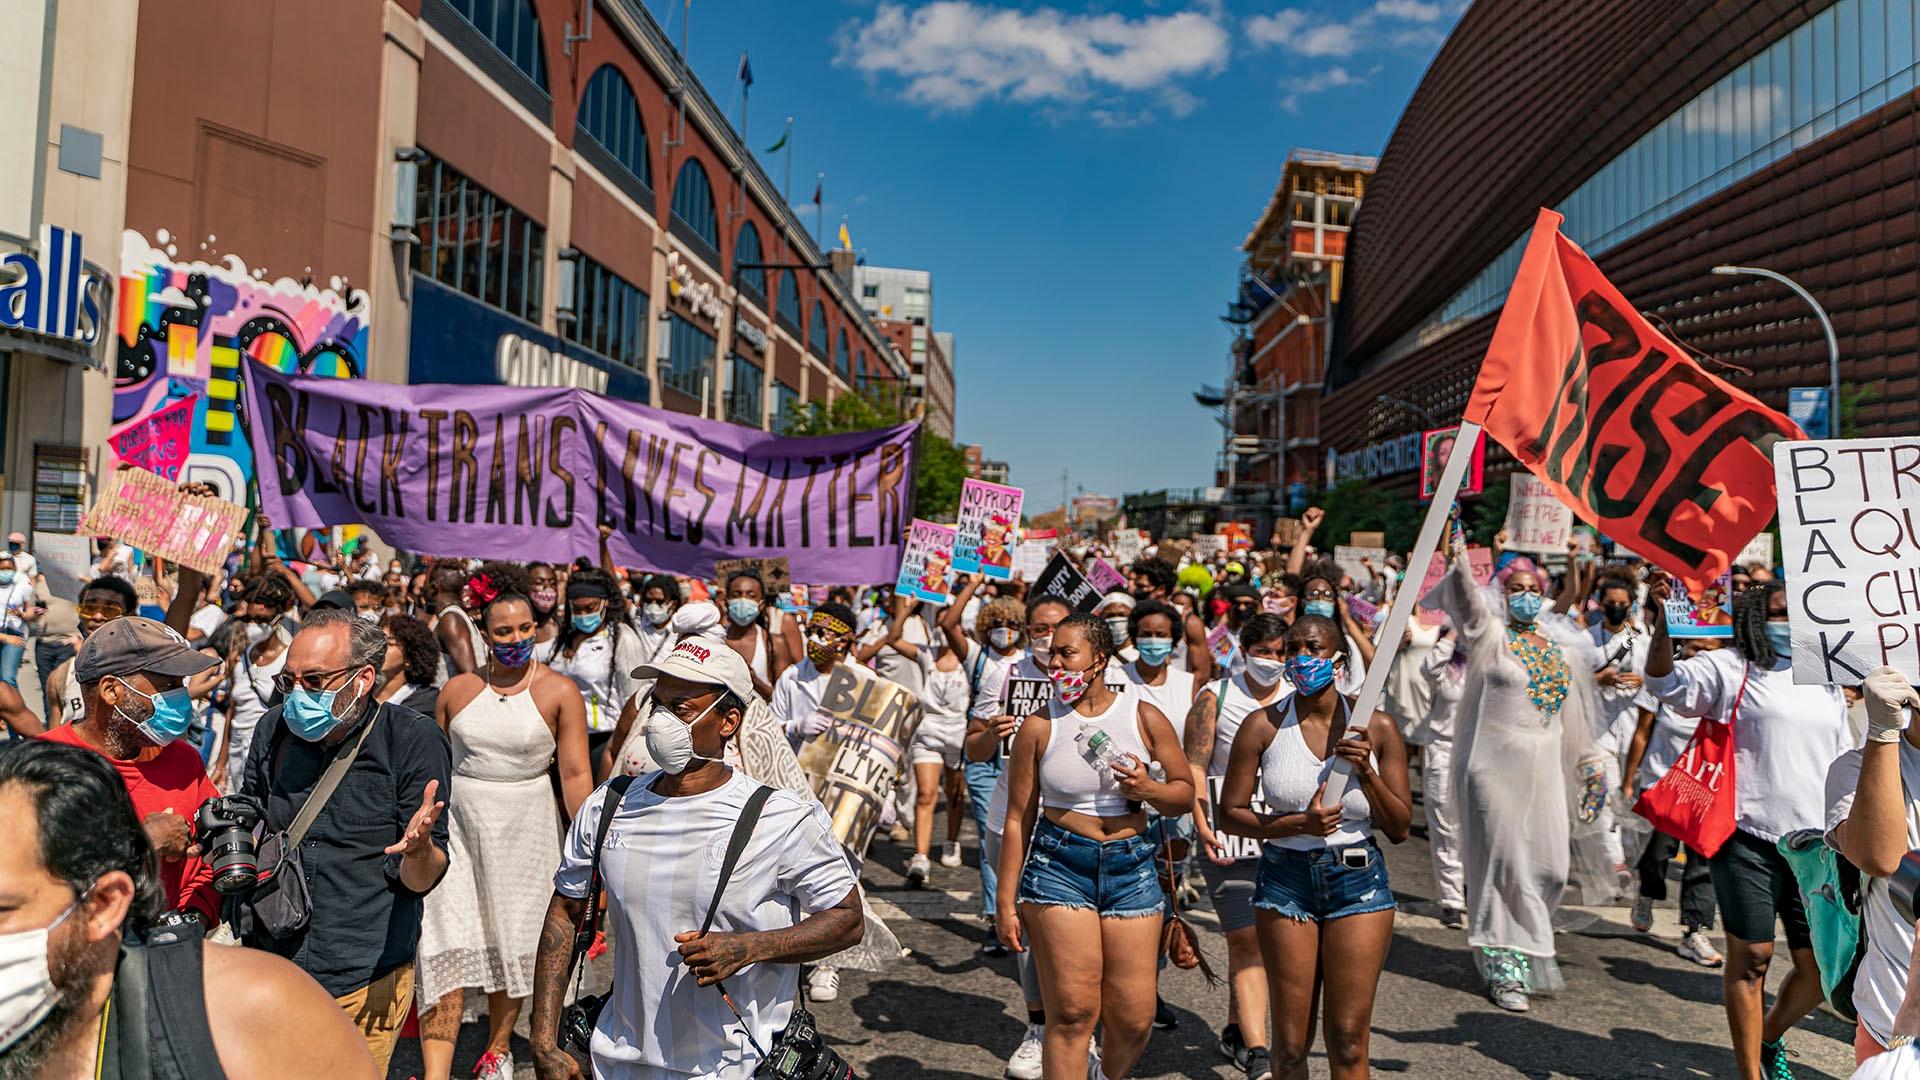 Women marching in Black Trans Lives Matter protest.